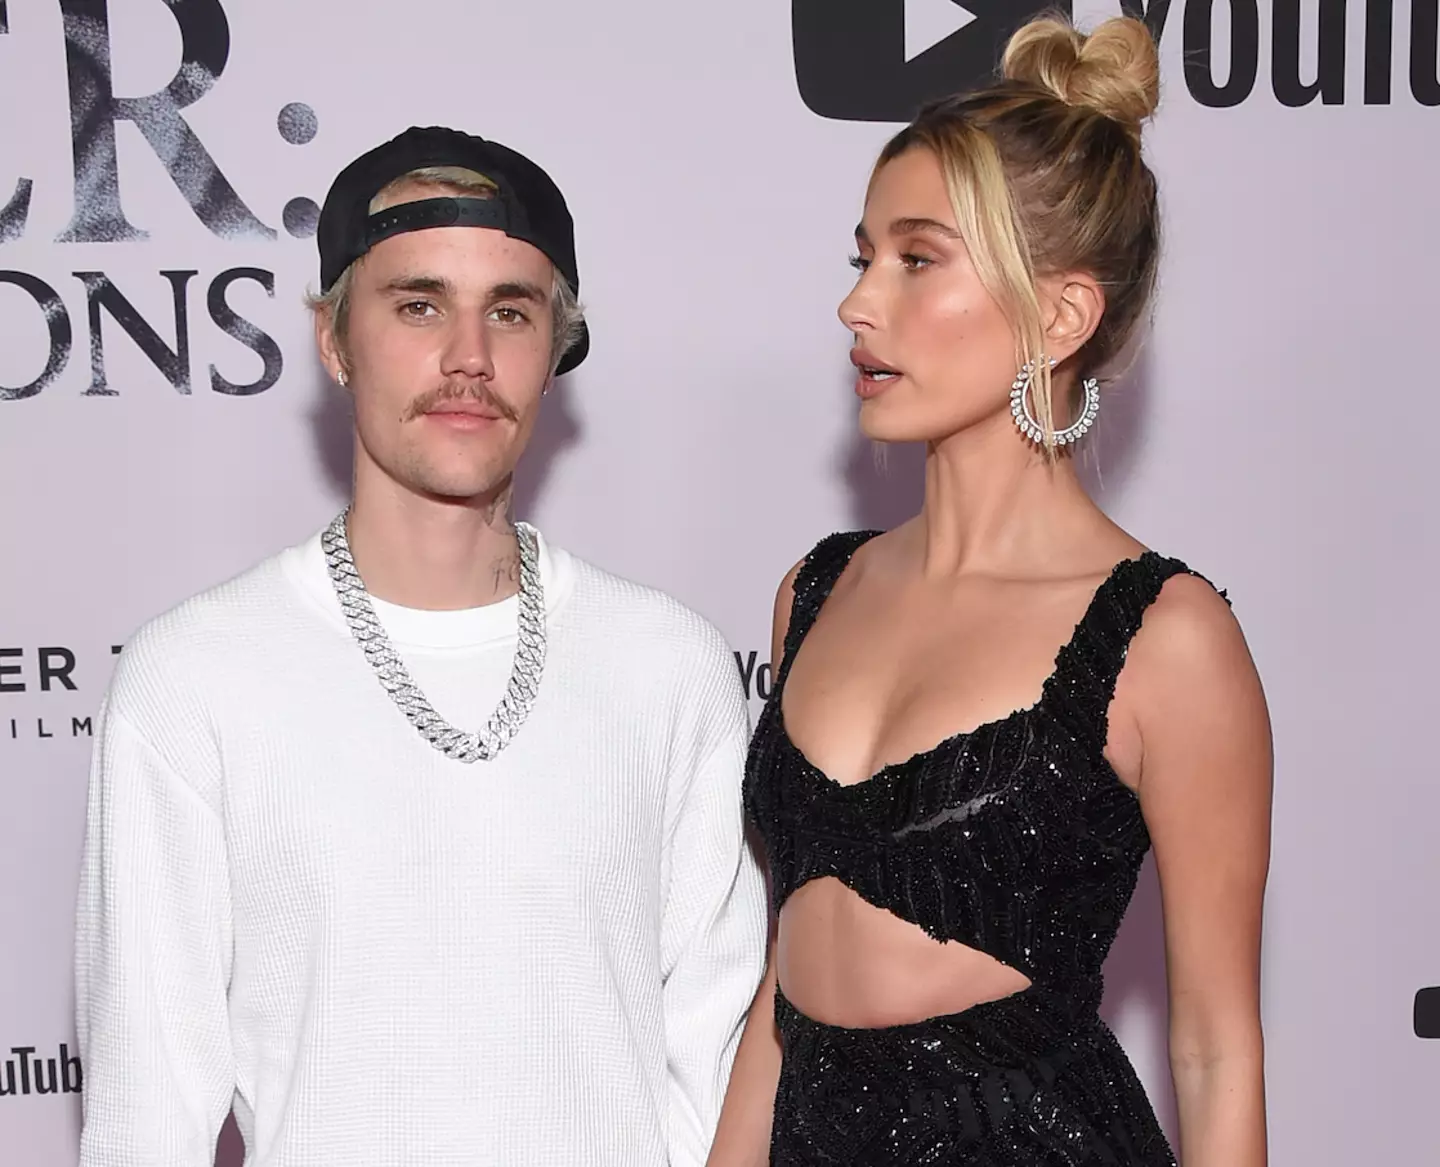 Justin and Hailey married in 2018.